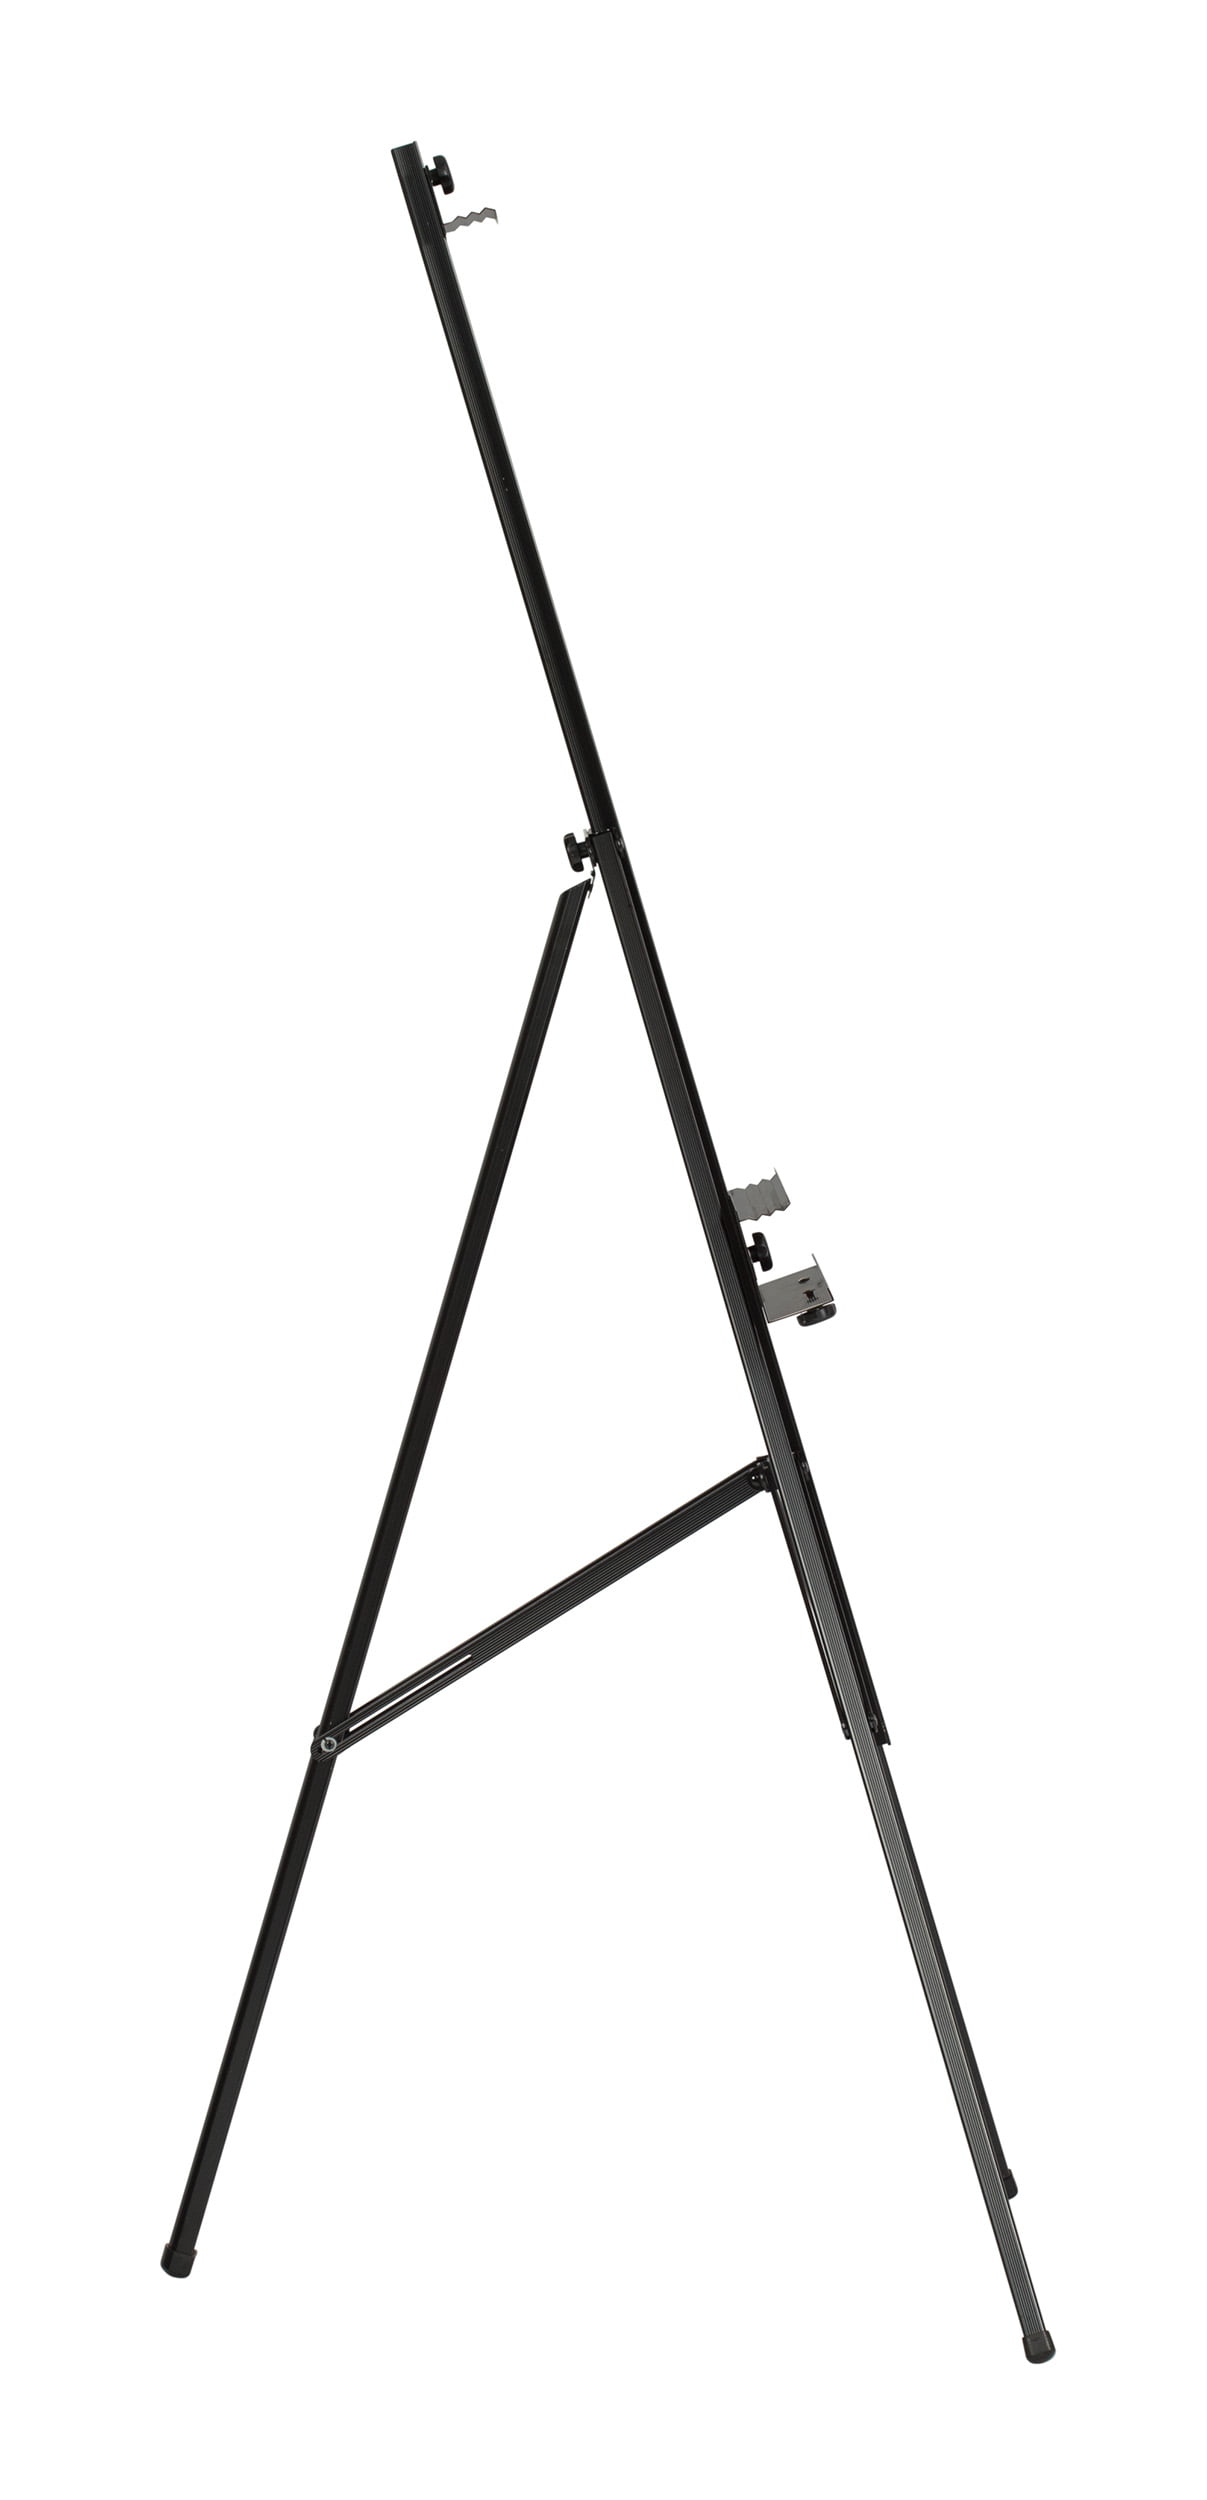  Tripar Modern Tripod Easel Display, Black Finish (5.25-Inch  Depth, 1 Foot Height) - Lightweight & Durable Design - Perfect for  Displaying Decorative Pictures, Artwork, Plates, Tiles, & More